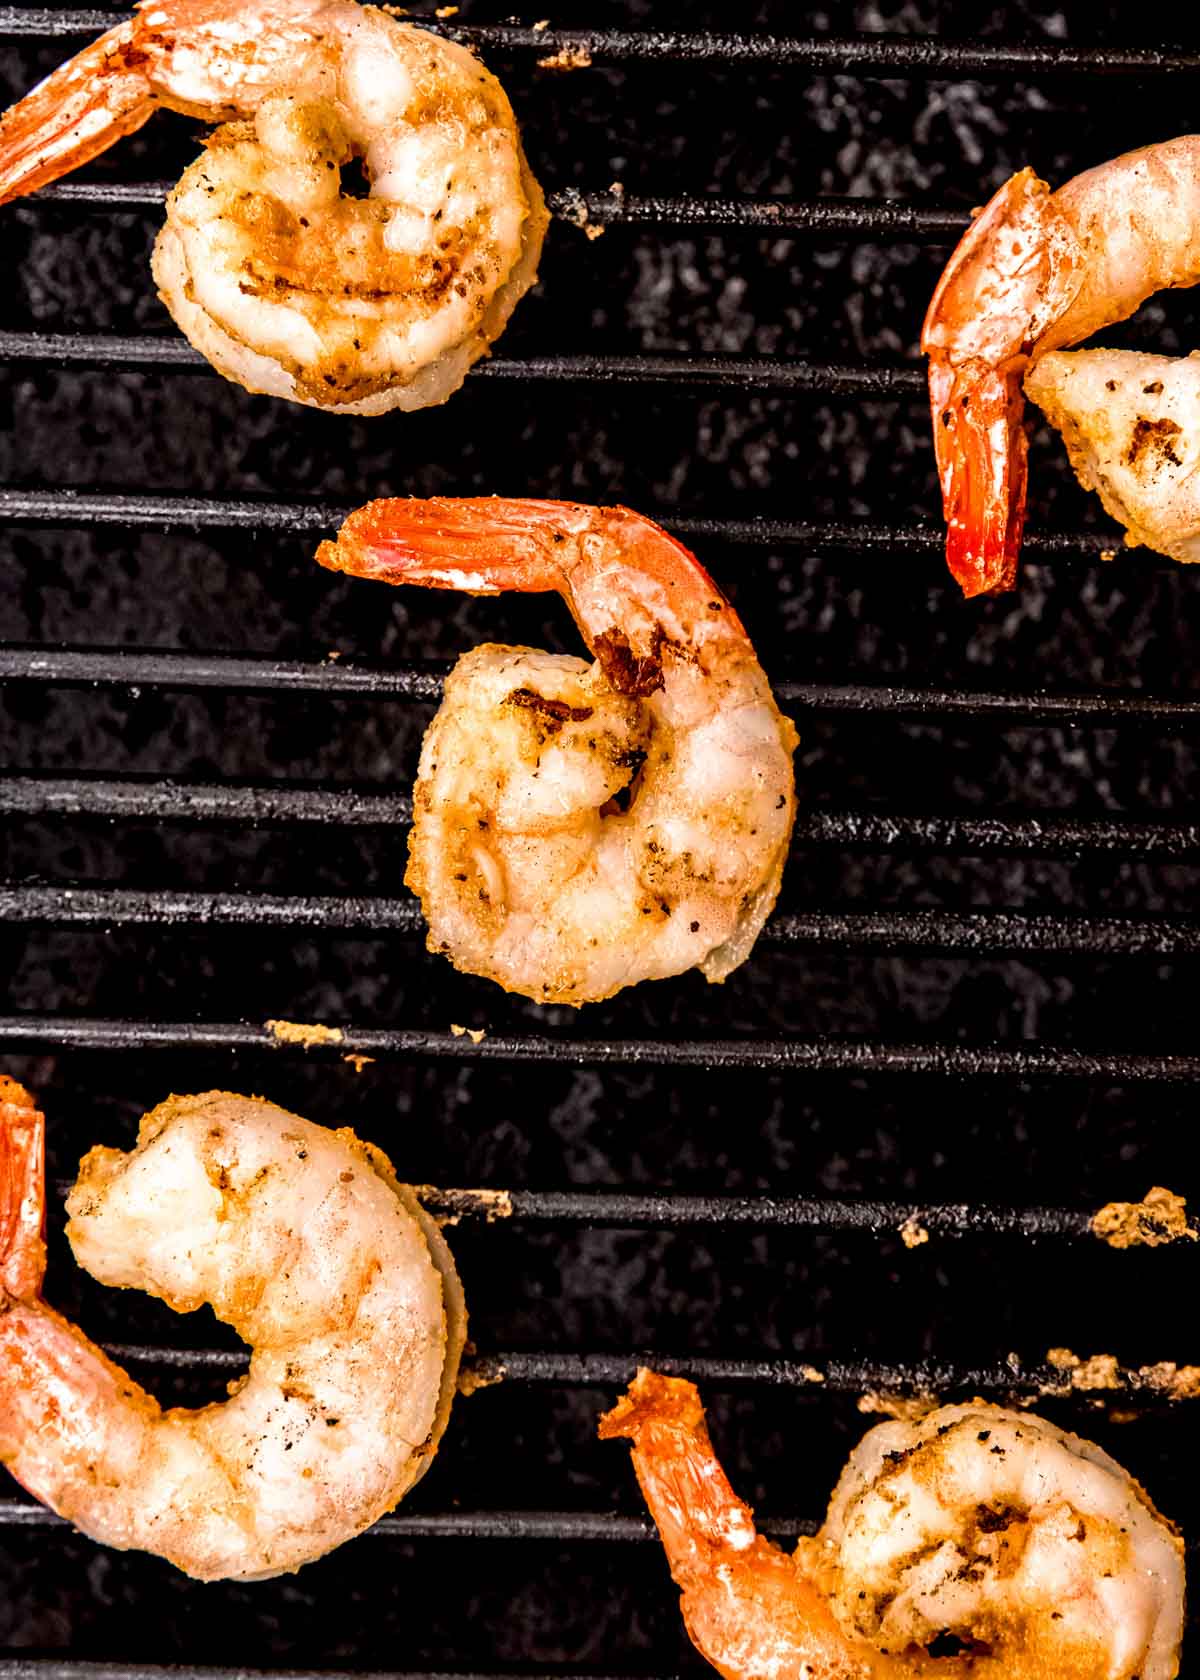 shrimp grilling on a hot grill grate